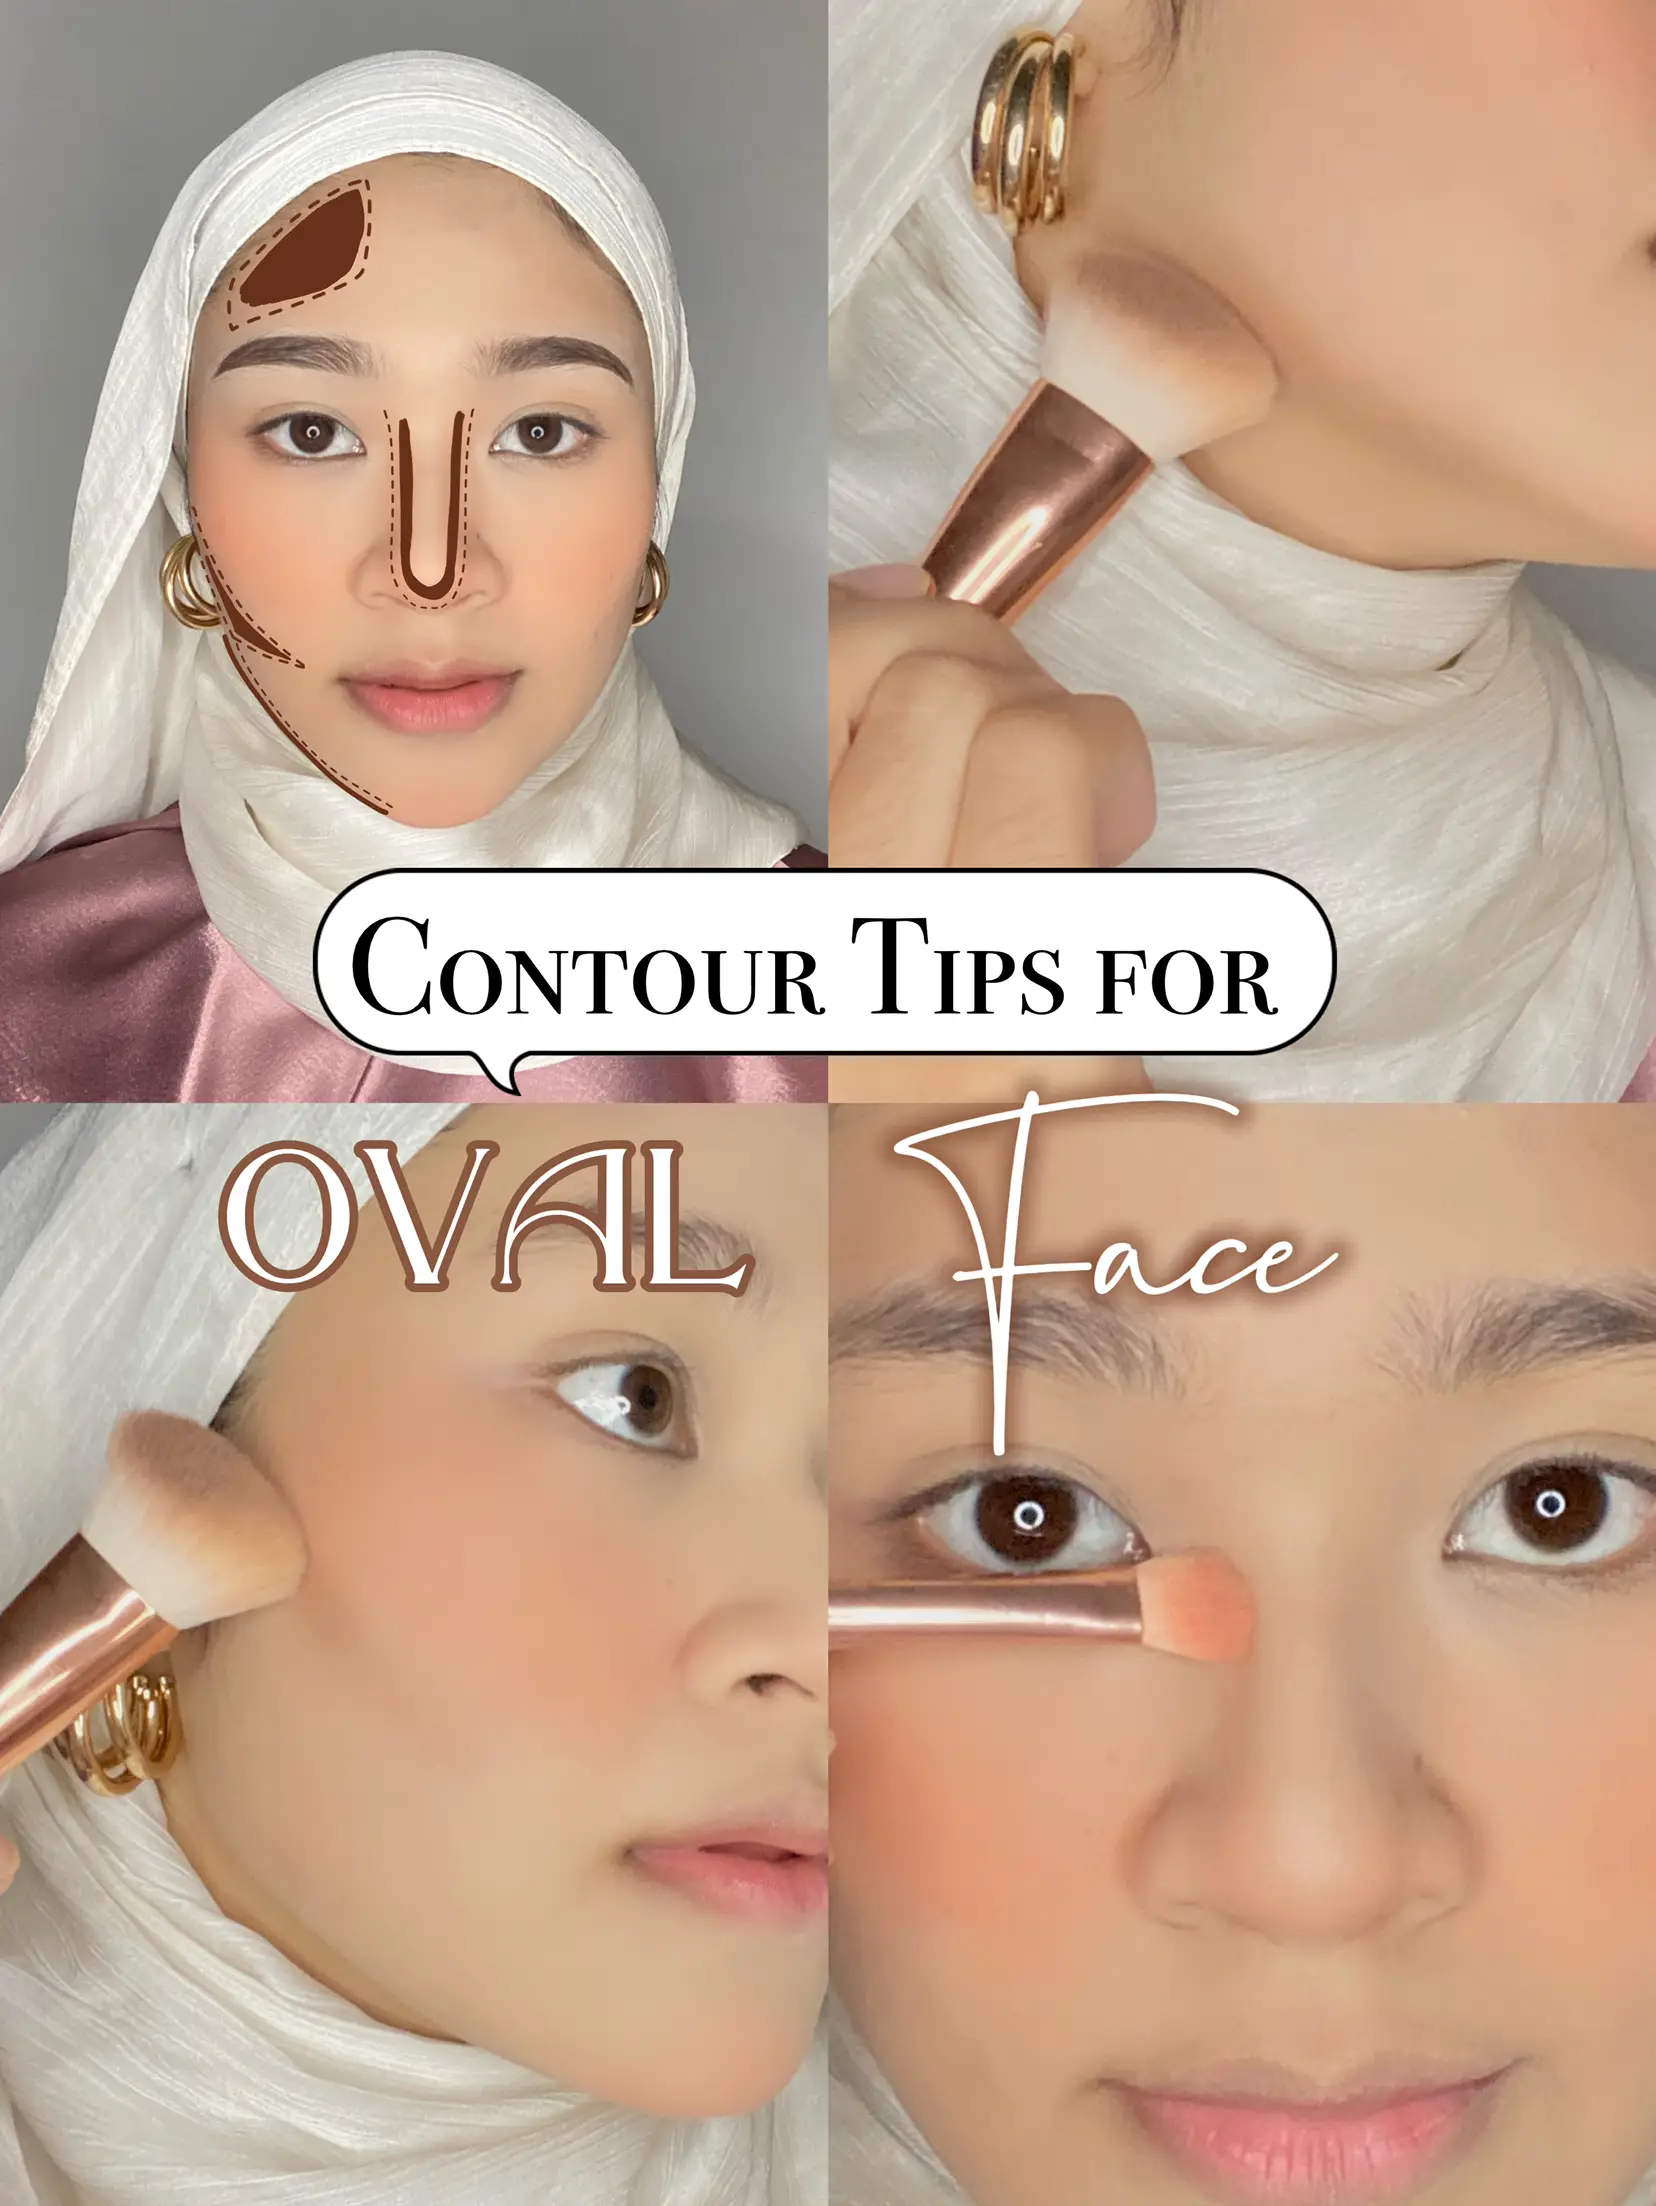 Contour Tips For Oval Face Gallery